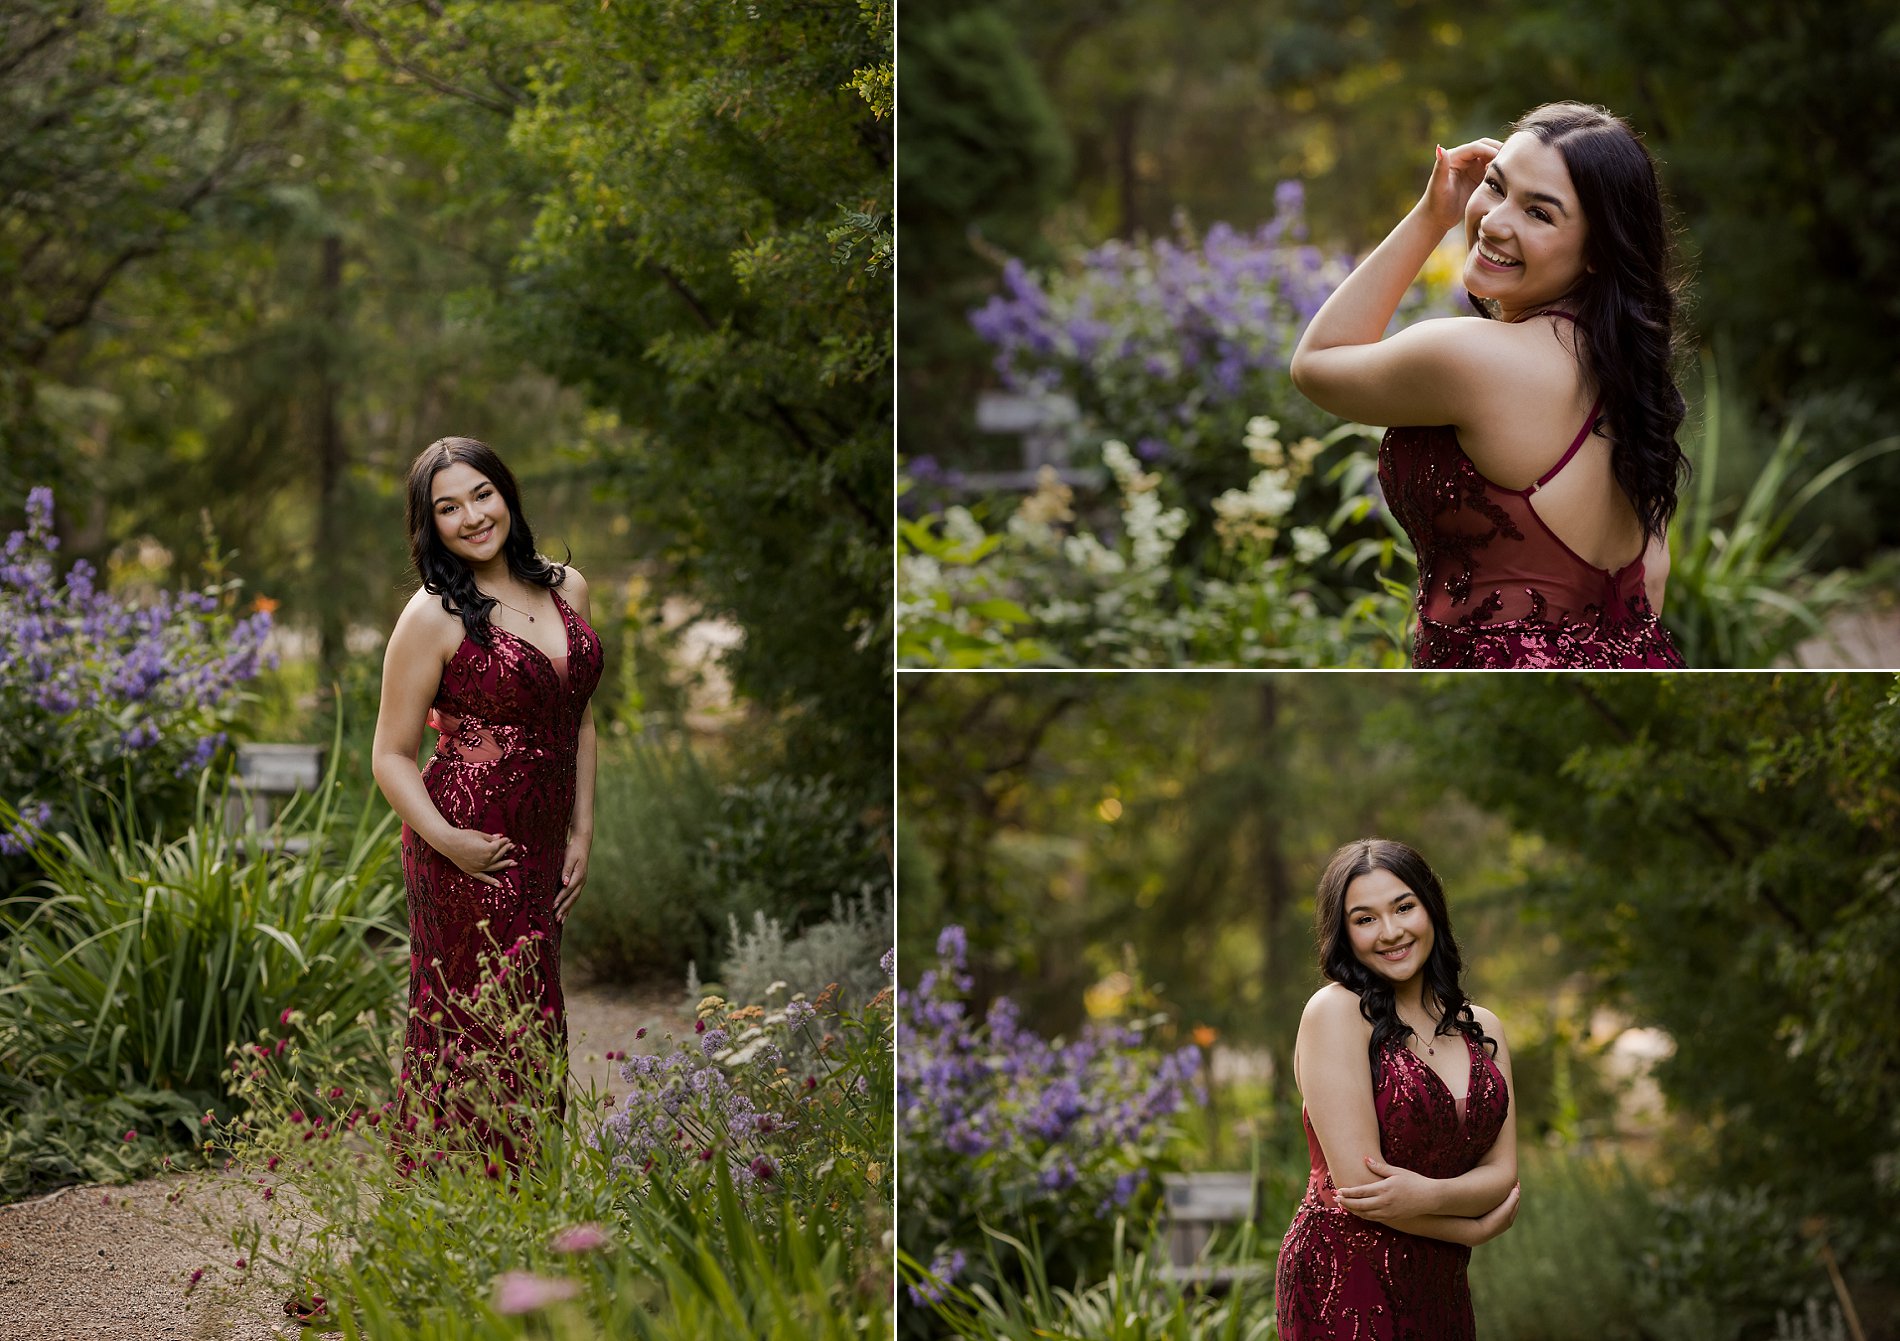 Graduation photos in a blooming garden at the Forestry Farm in Saskatoon.